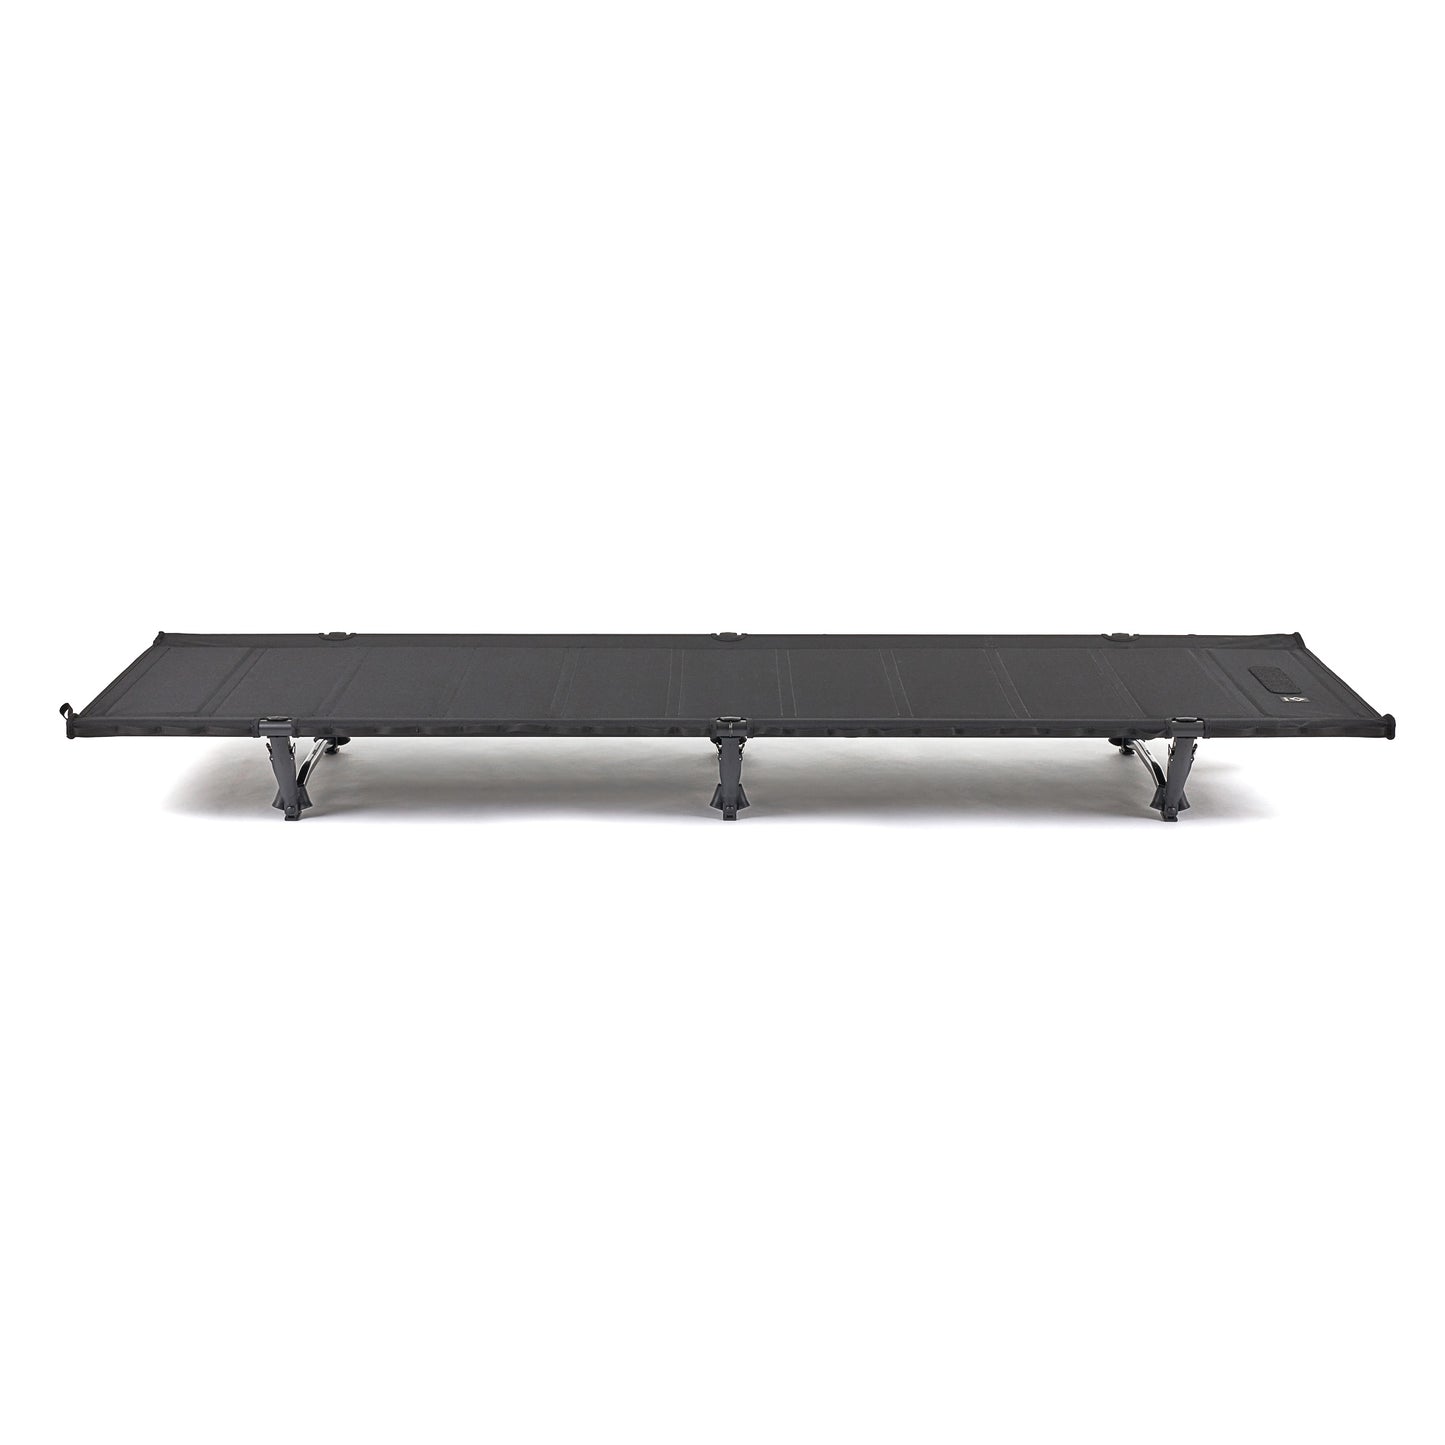 Tac. Field Table (Tac. Cot table ) - Black